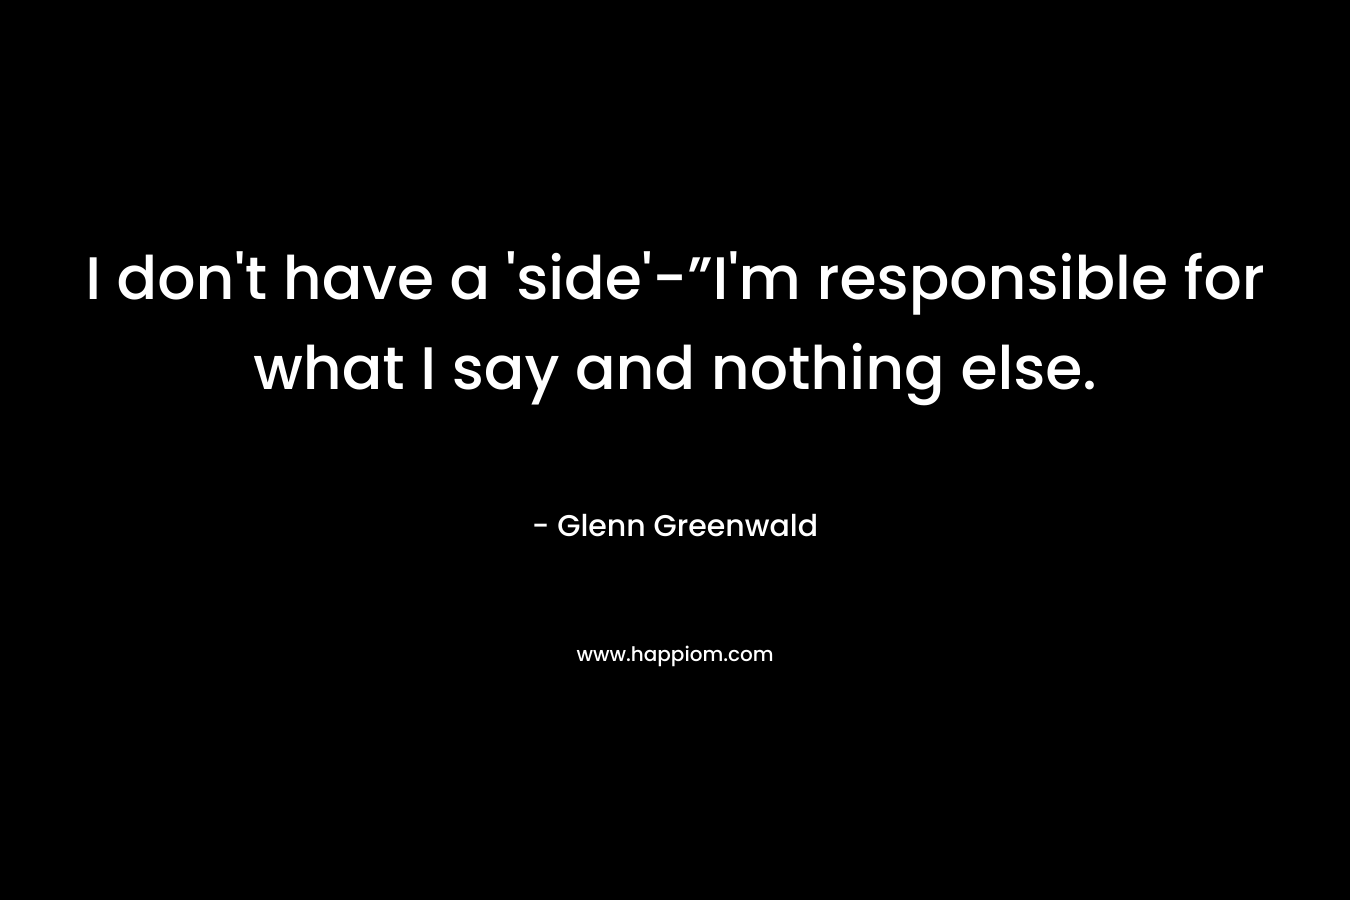 I don't have a 'side'-”I'm responsible for what I say and nothing else.